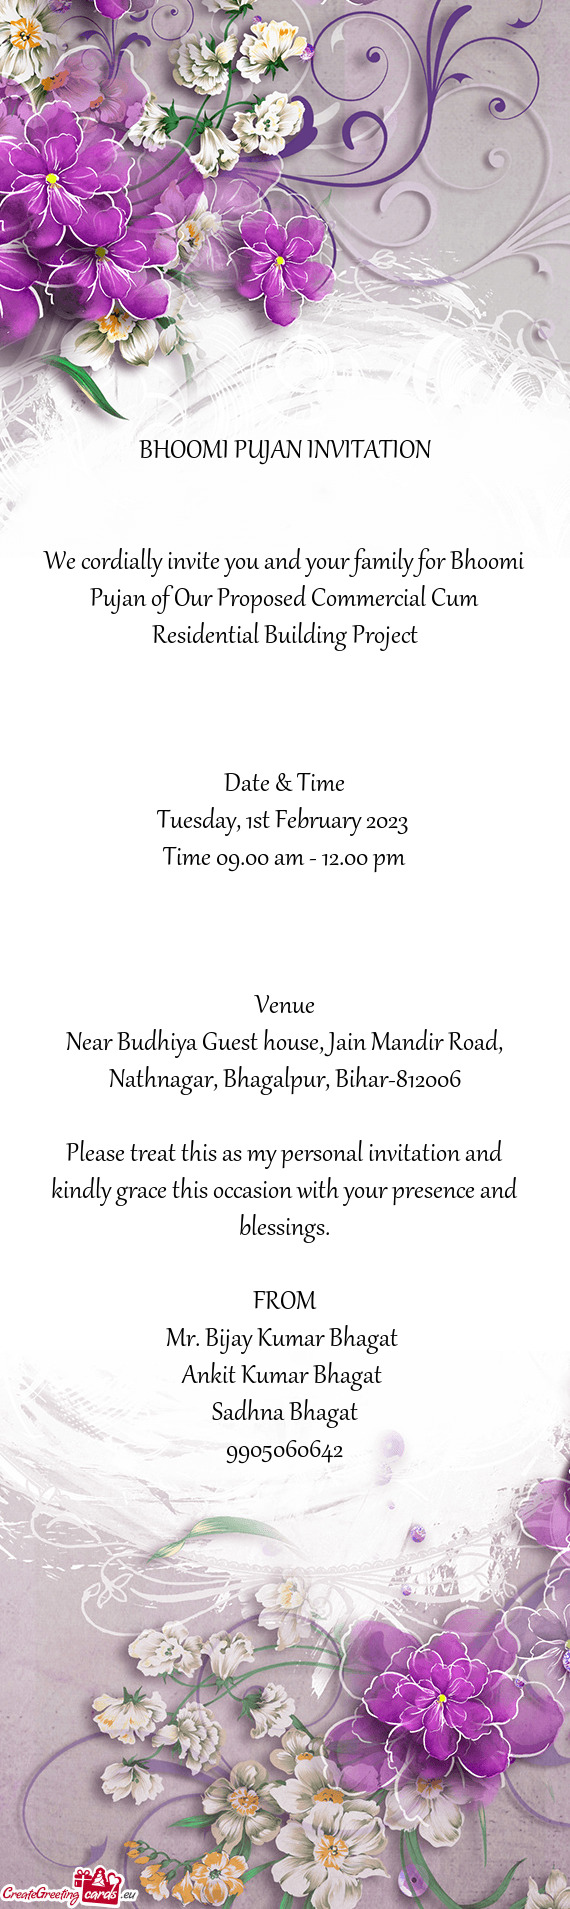 We cordially invite you and your family for Bhoomi Pujan of Our Proposed Commercial Cum Residential